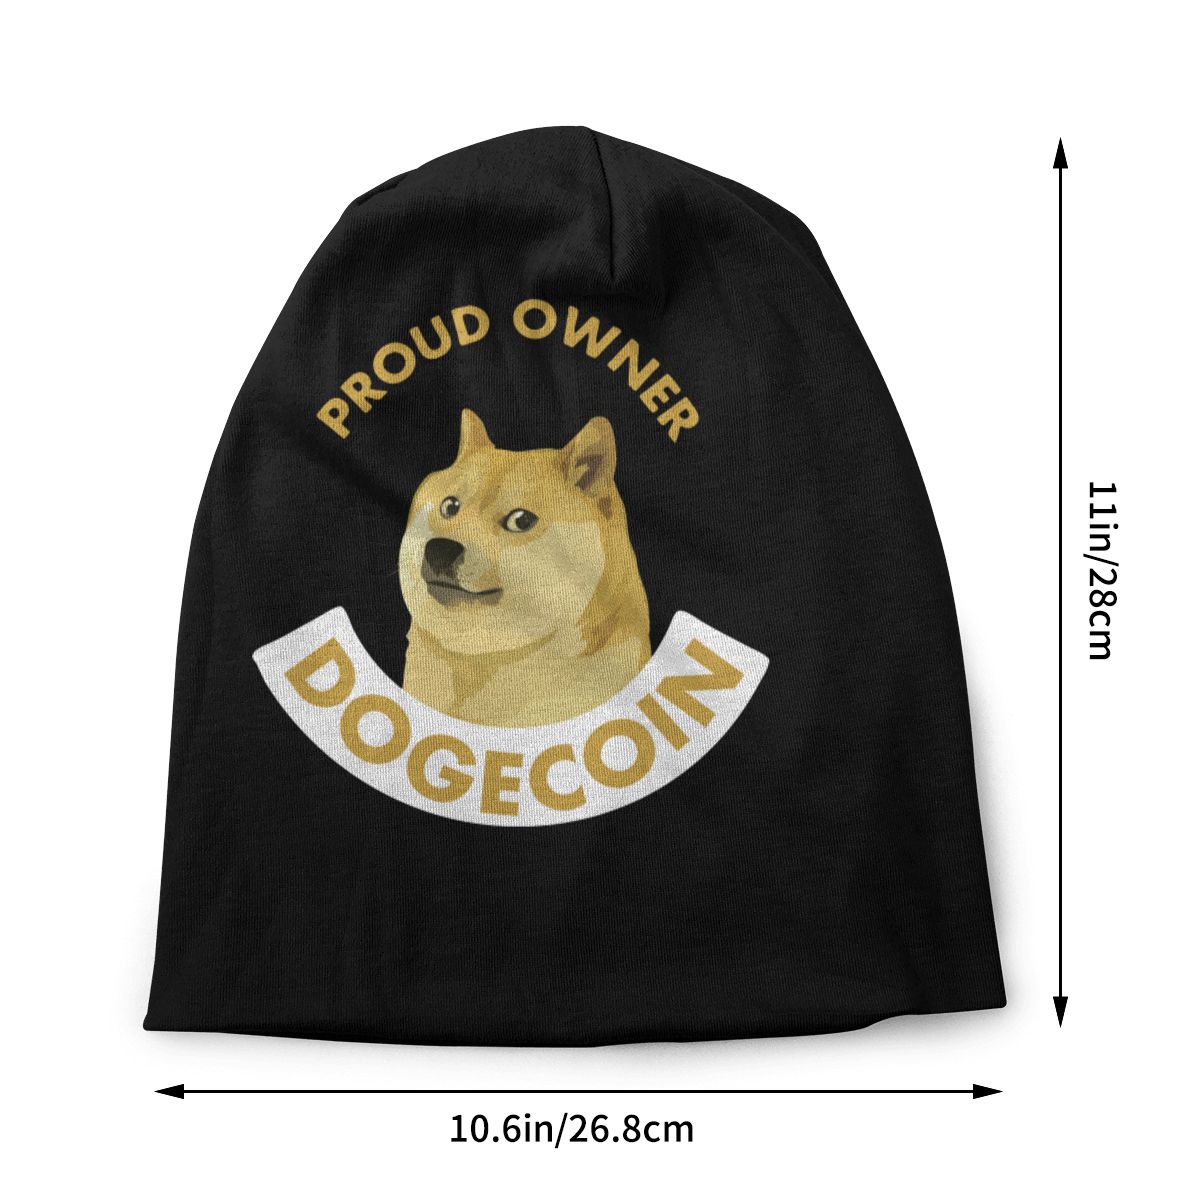 Dogecoin knitted hat